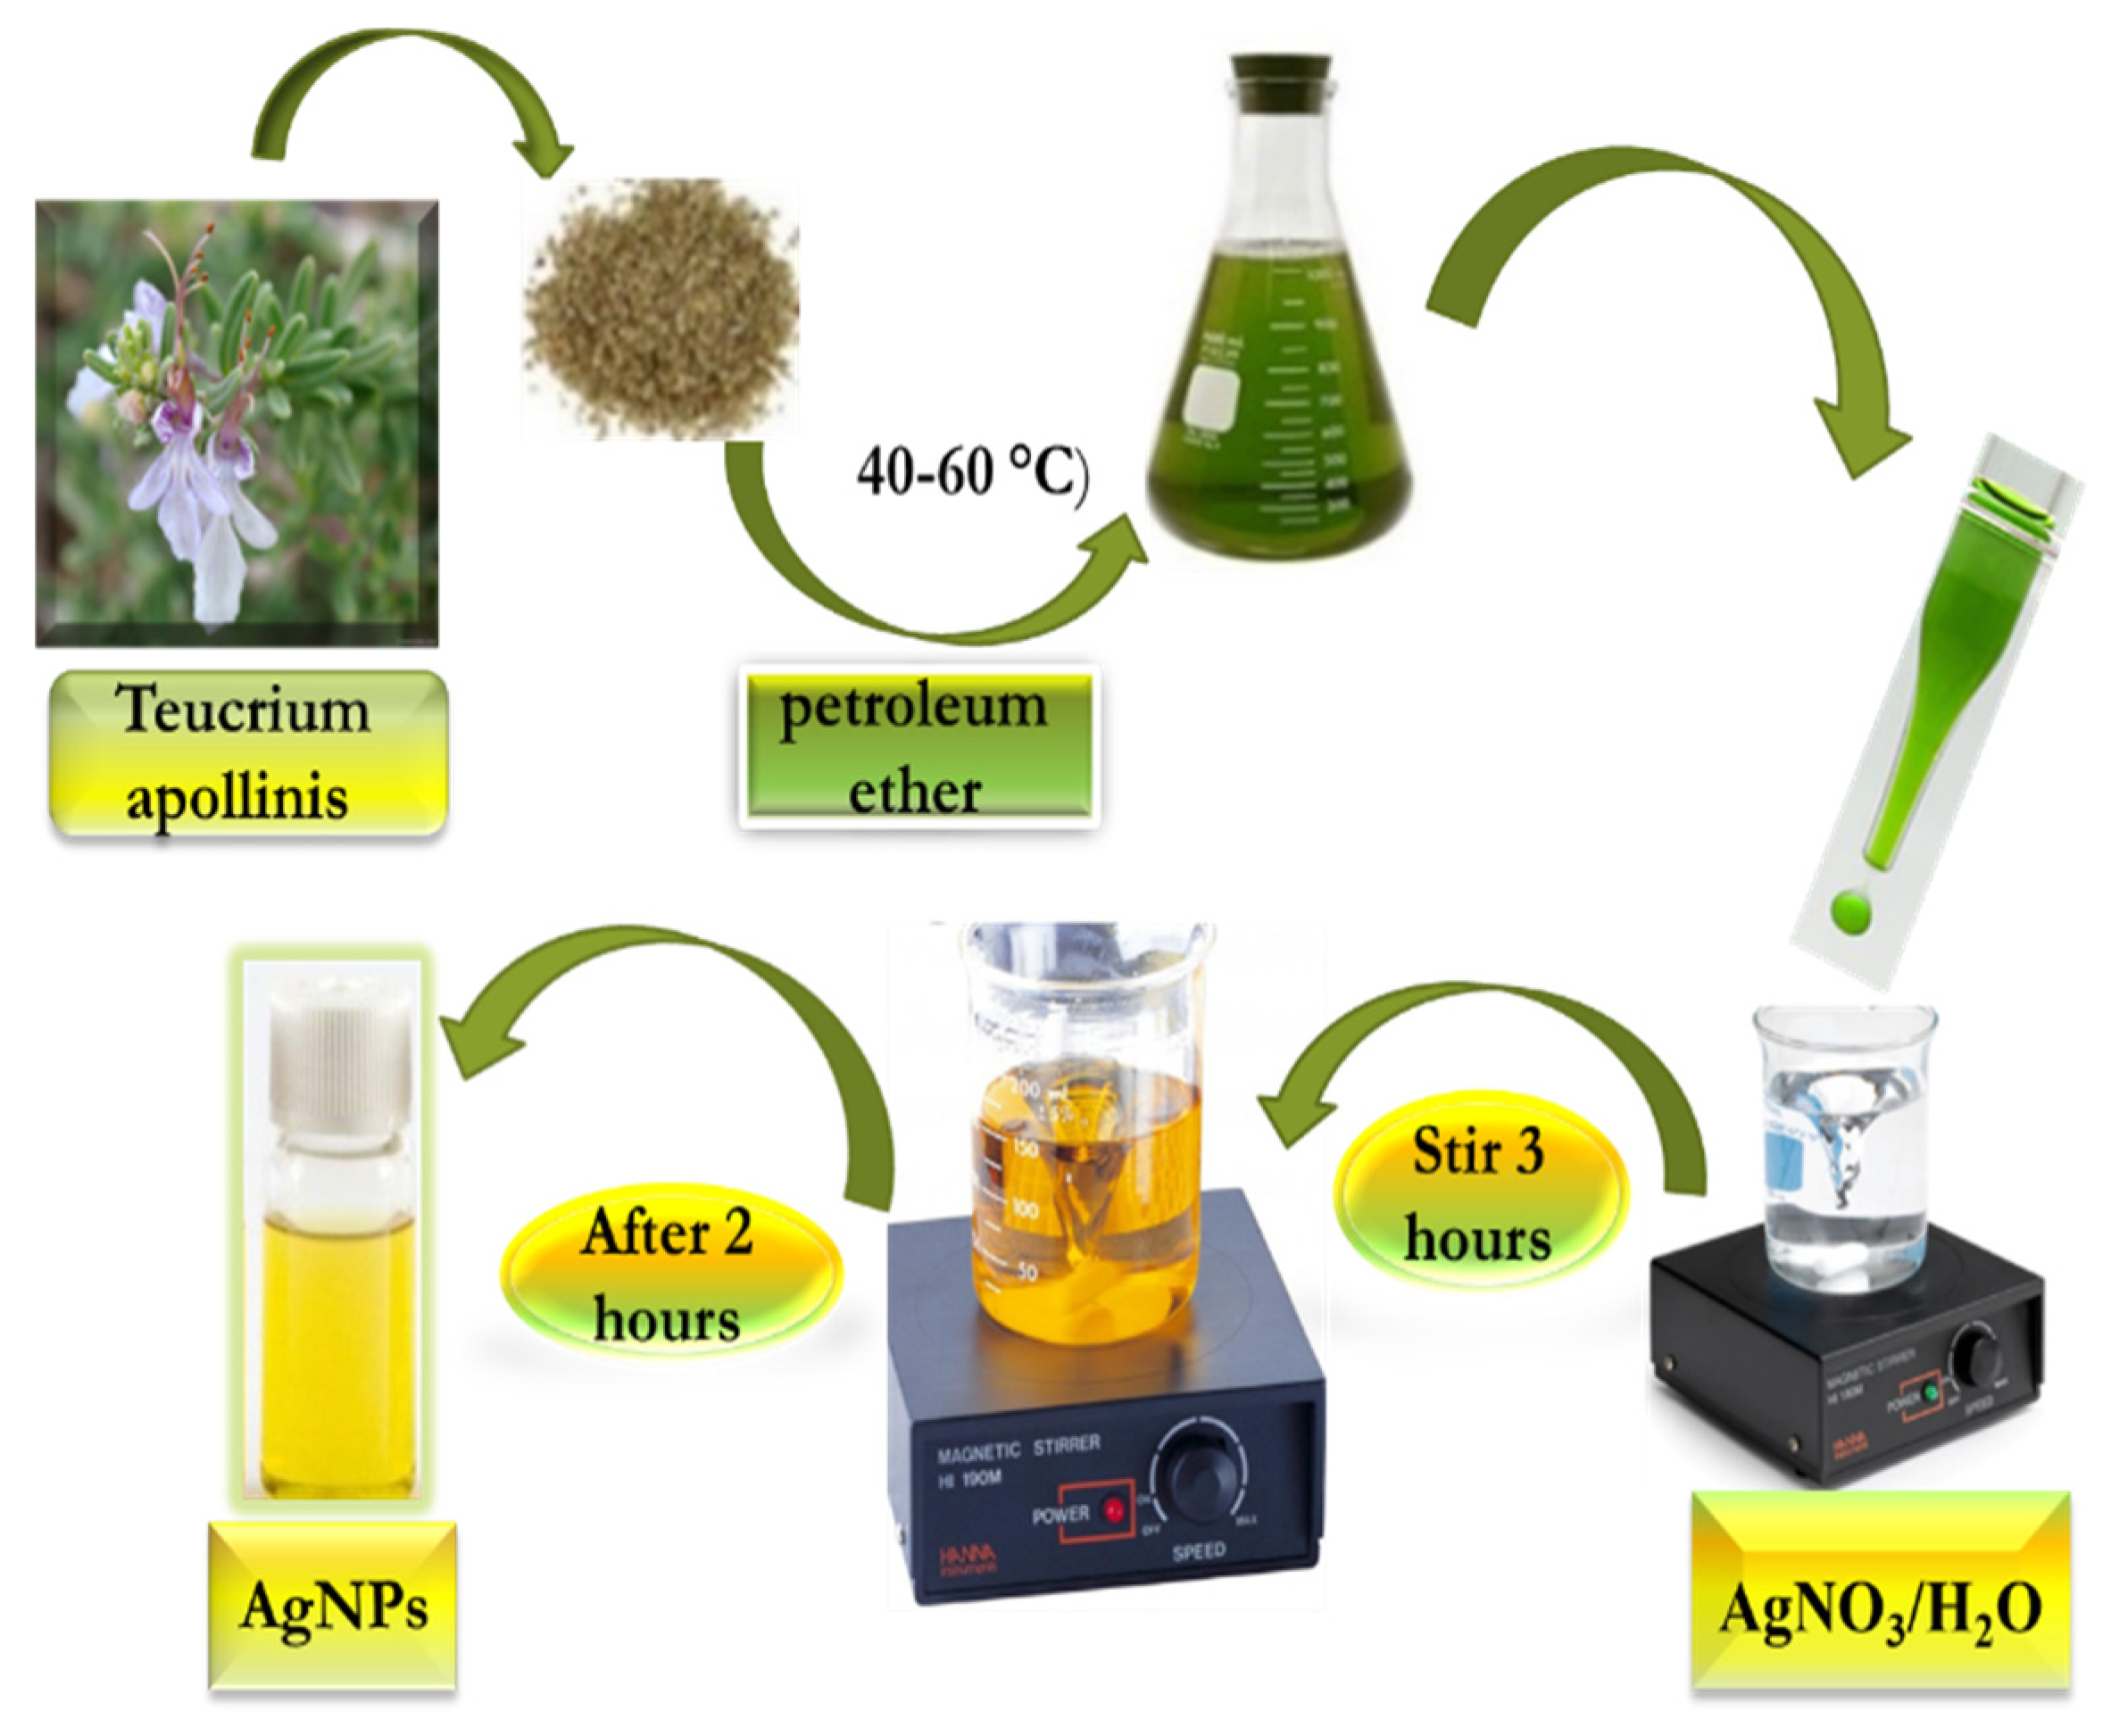 synthesis of silver nanoparticles research paper